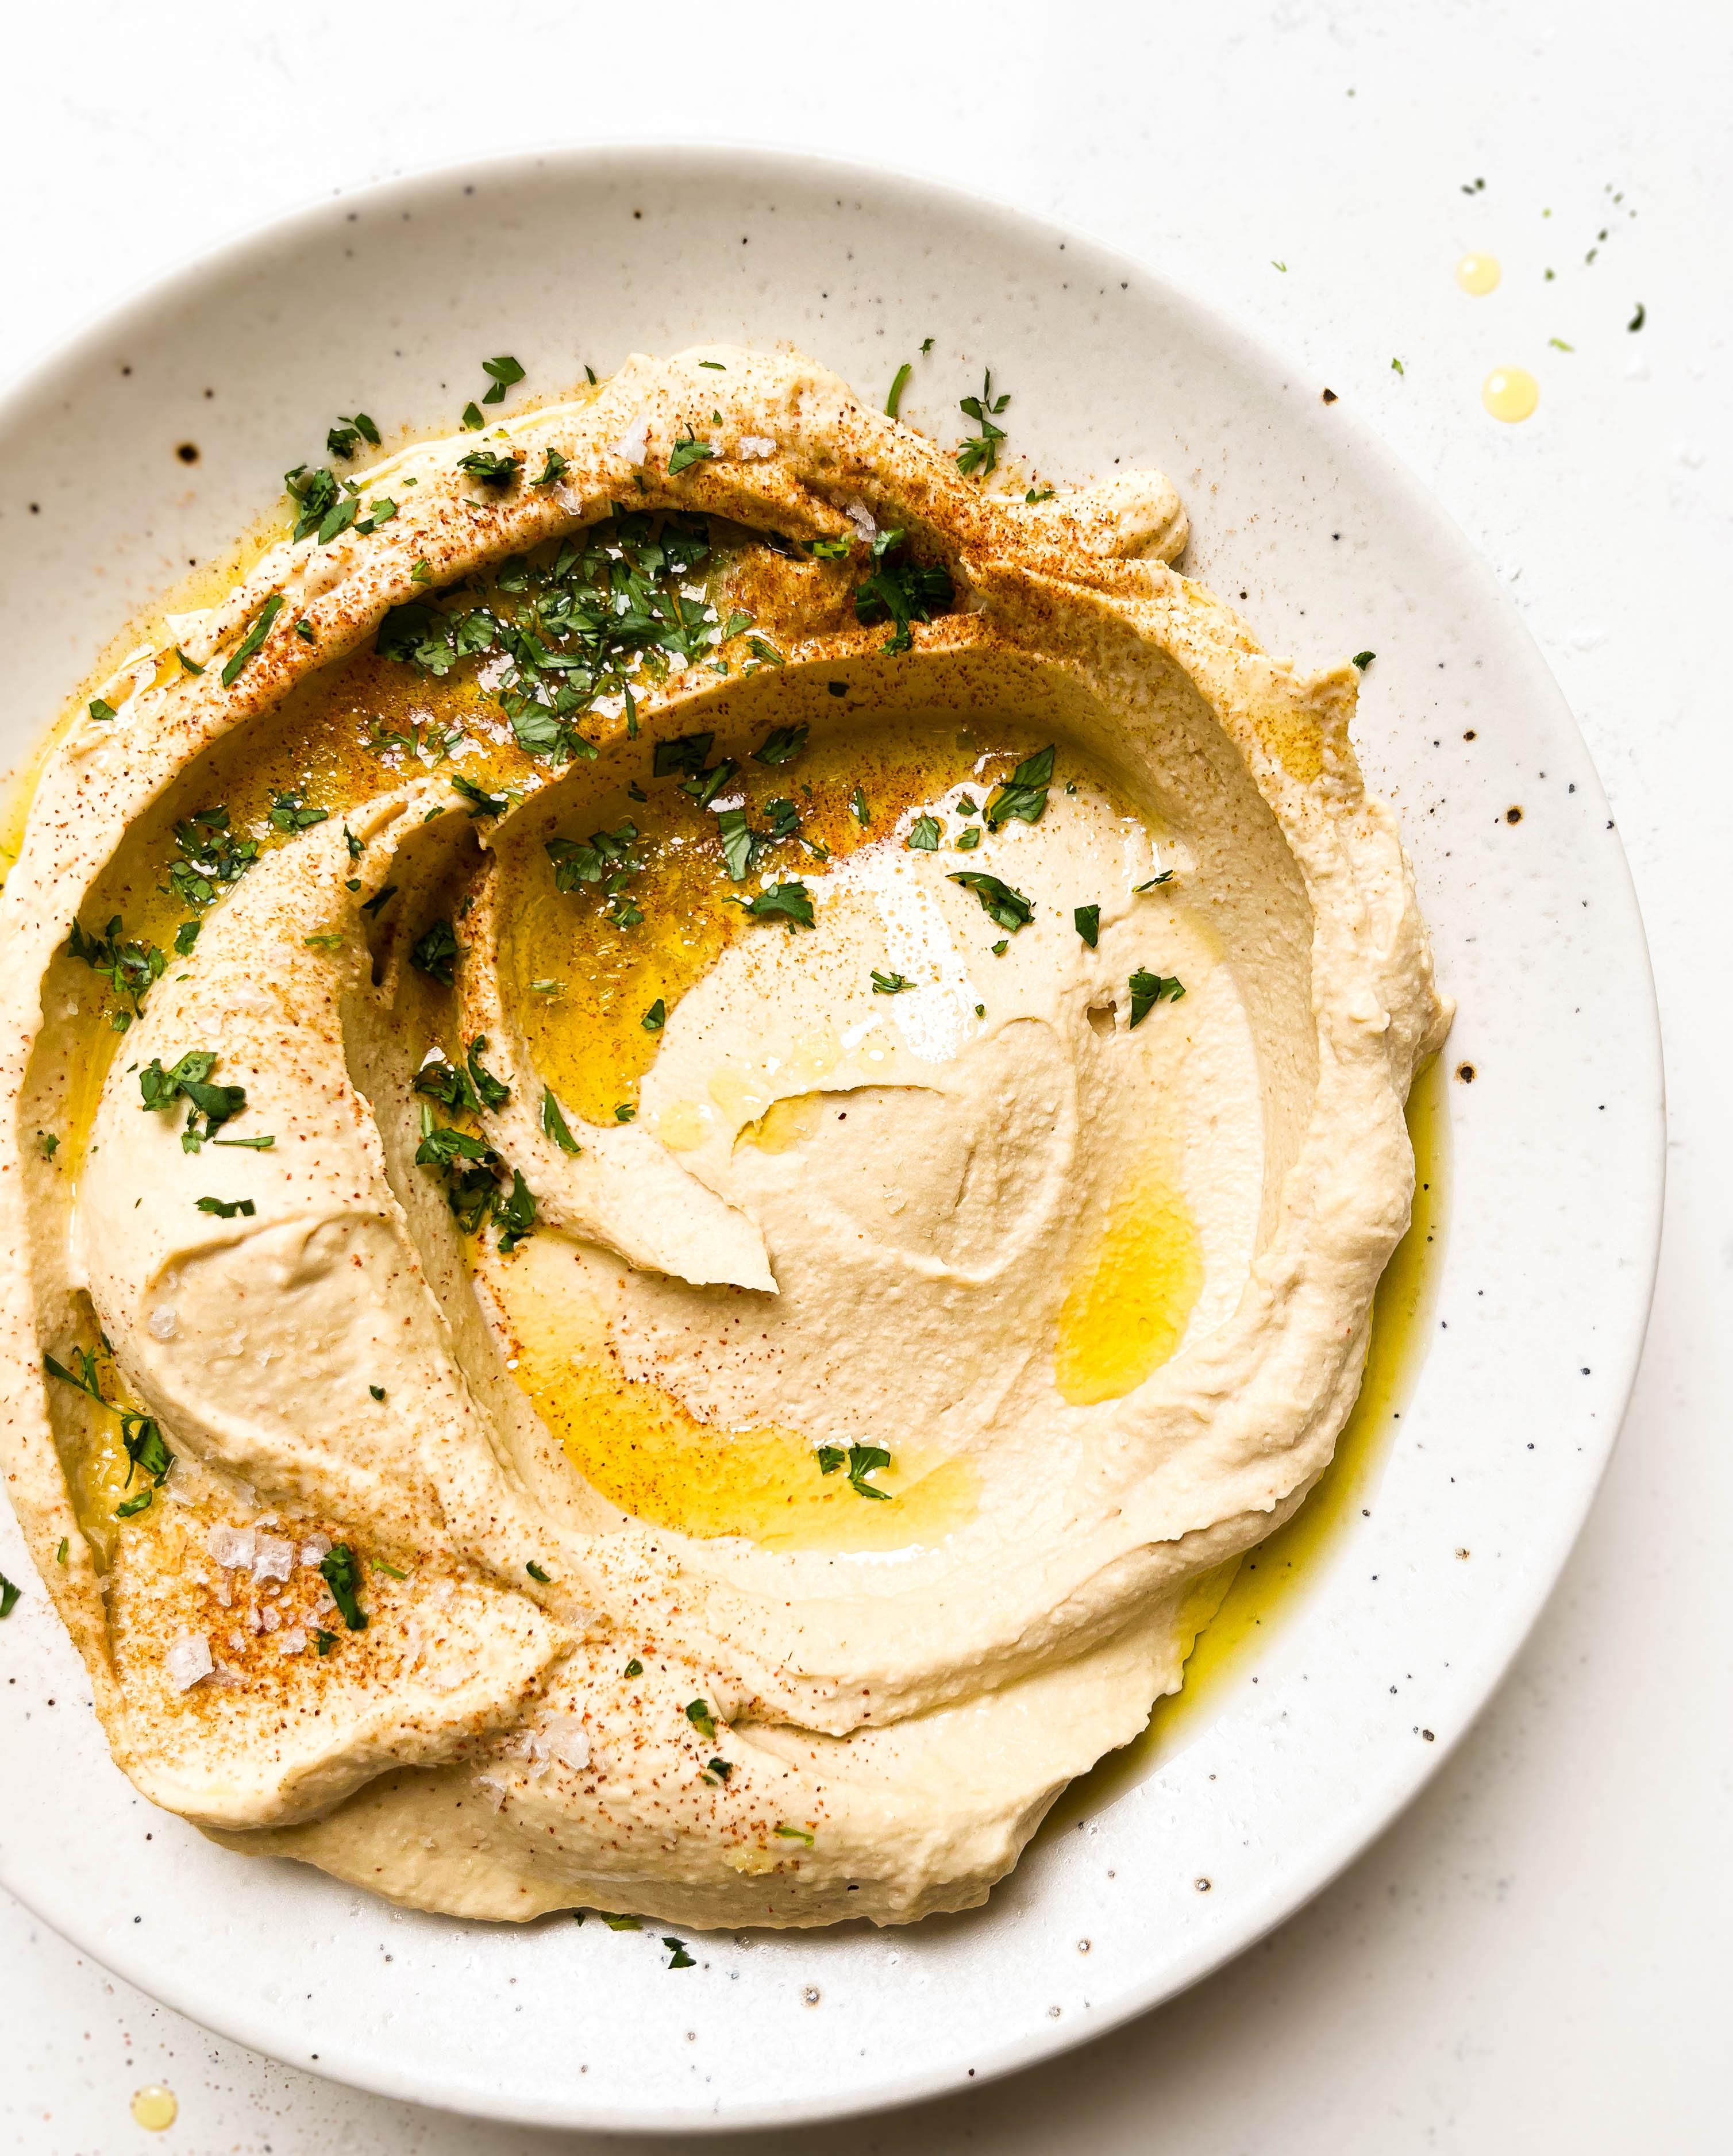 homemade hummus on a speckled plate